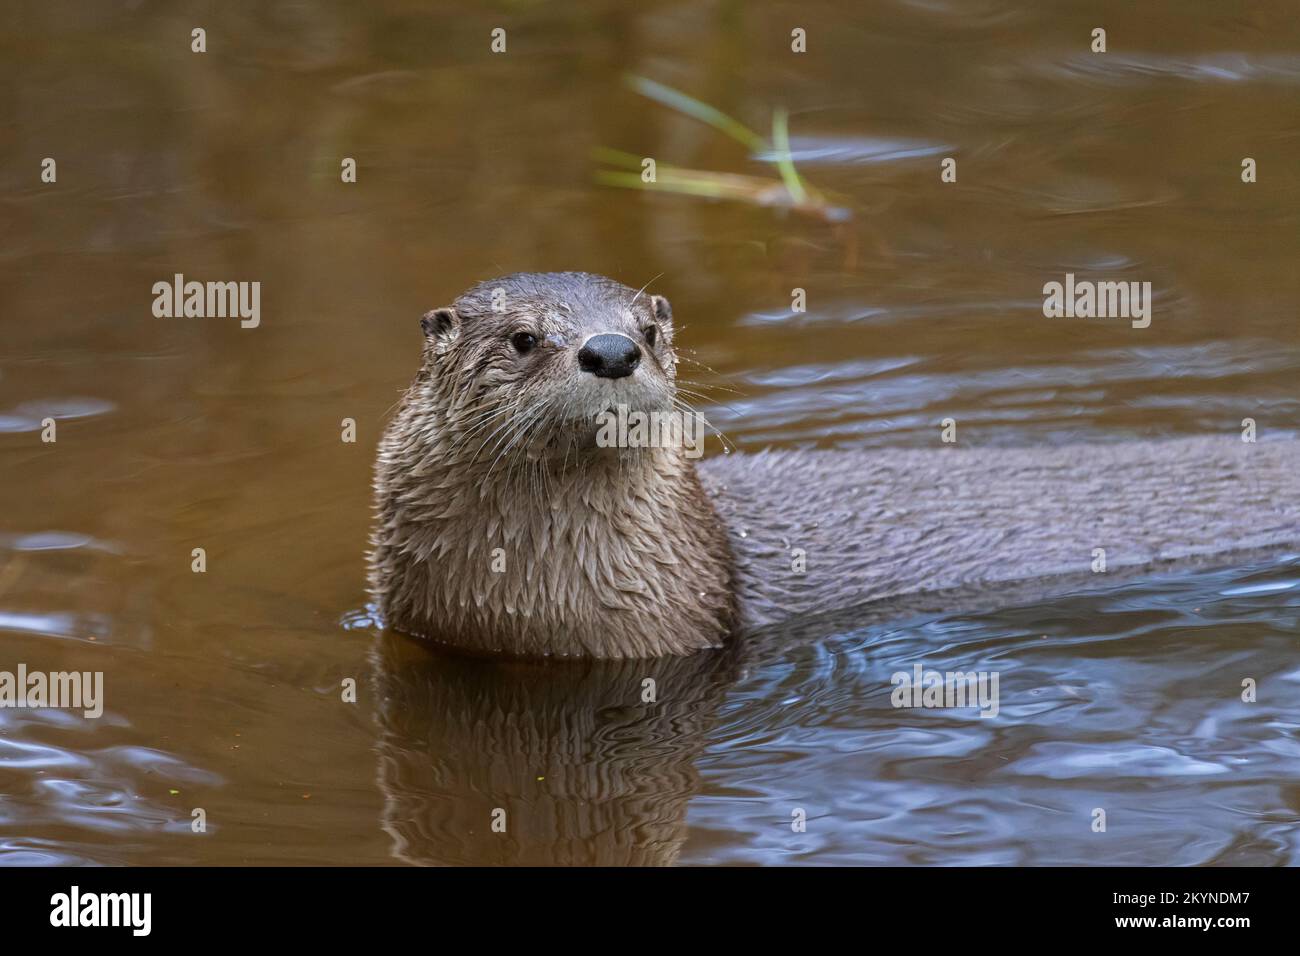 Eurasian otter / European river otter (Lutra lutra) close-up portrait in water of pond Stock Photo